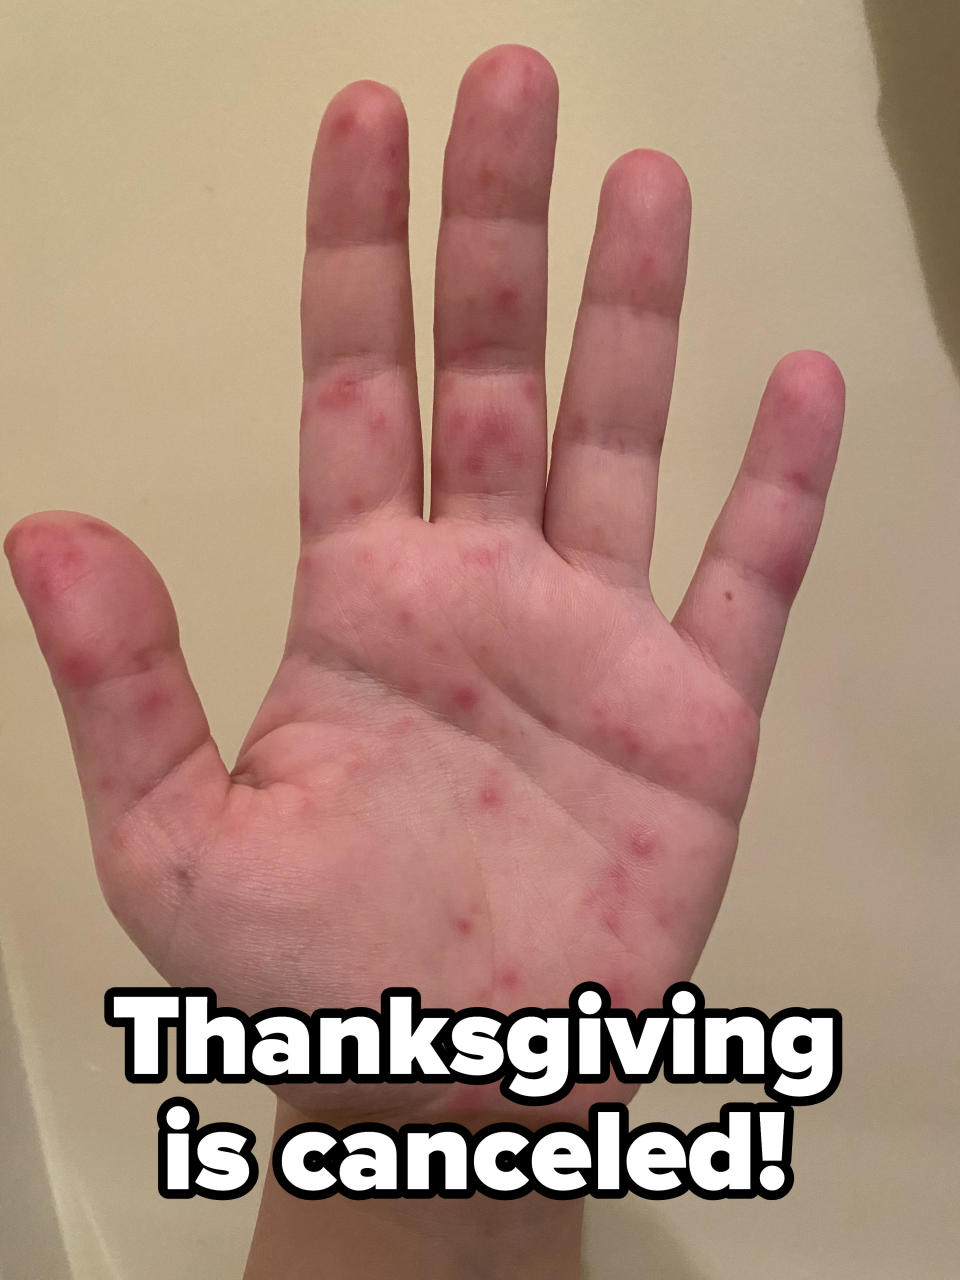 A hand with lesions and red blotches on it with the caption "Thanksgiving is canceled!"